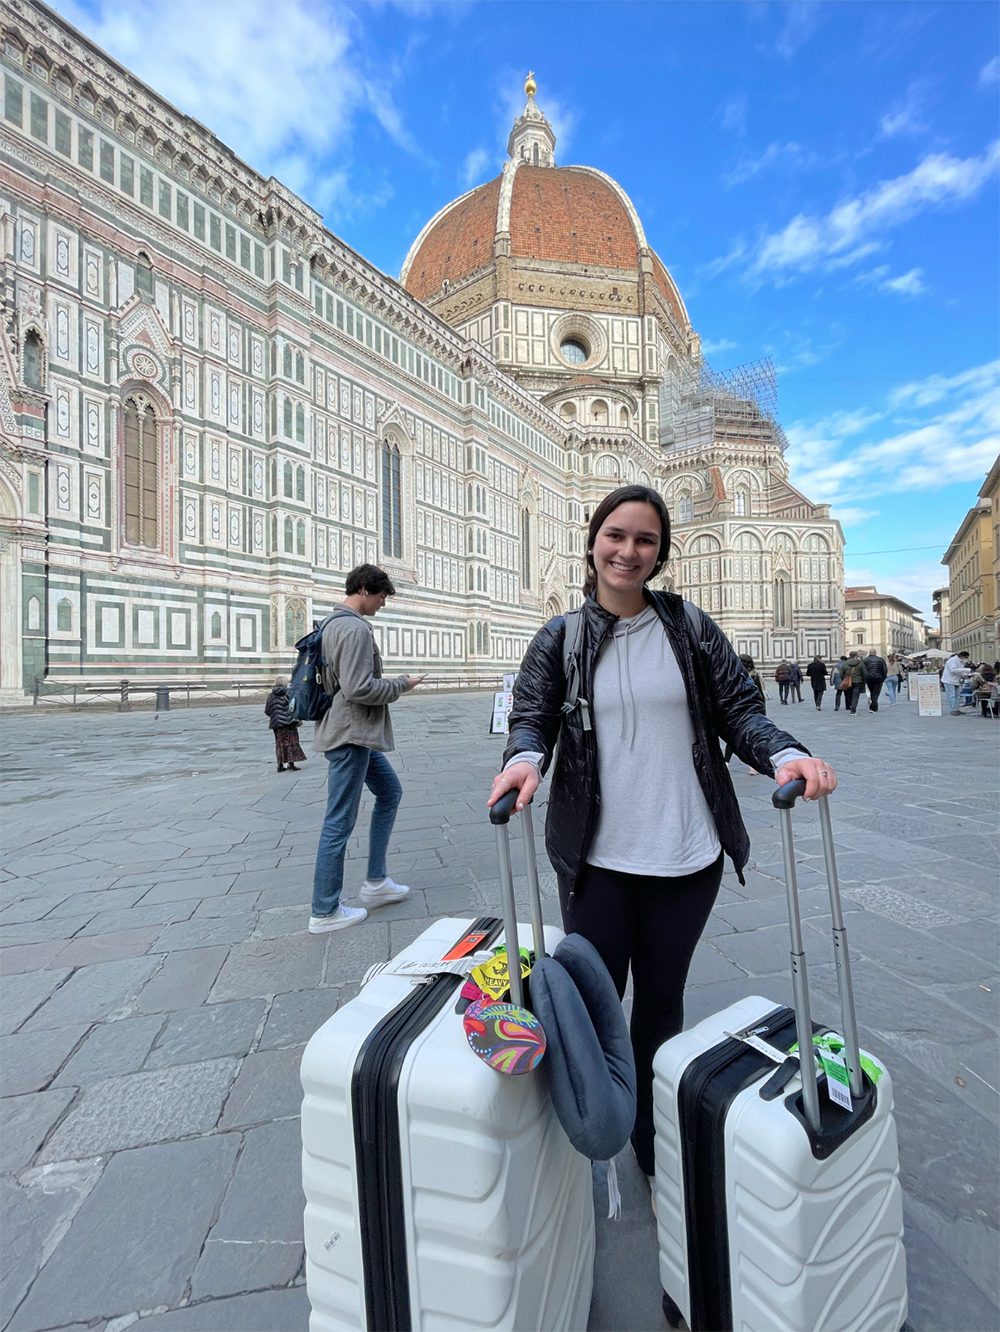 A girl wearing a white shirt ant black jacket stands in the foreground with two large white rolling suitcases, while a long white Italian building with a terra cotta dome stretching out in the background.